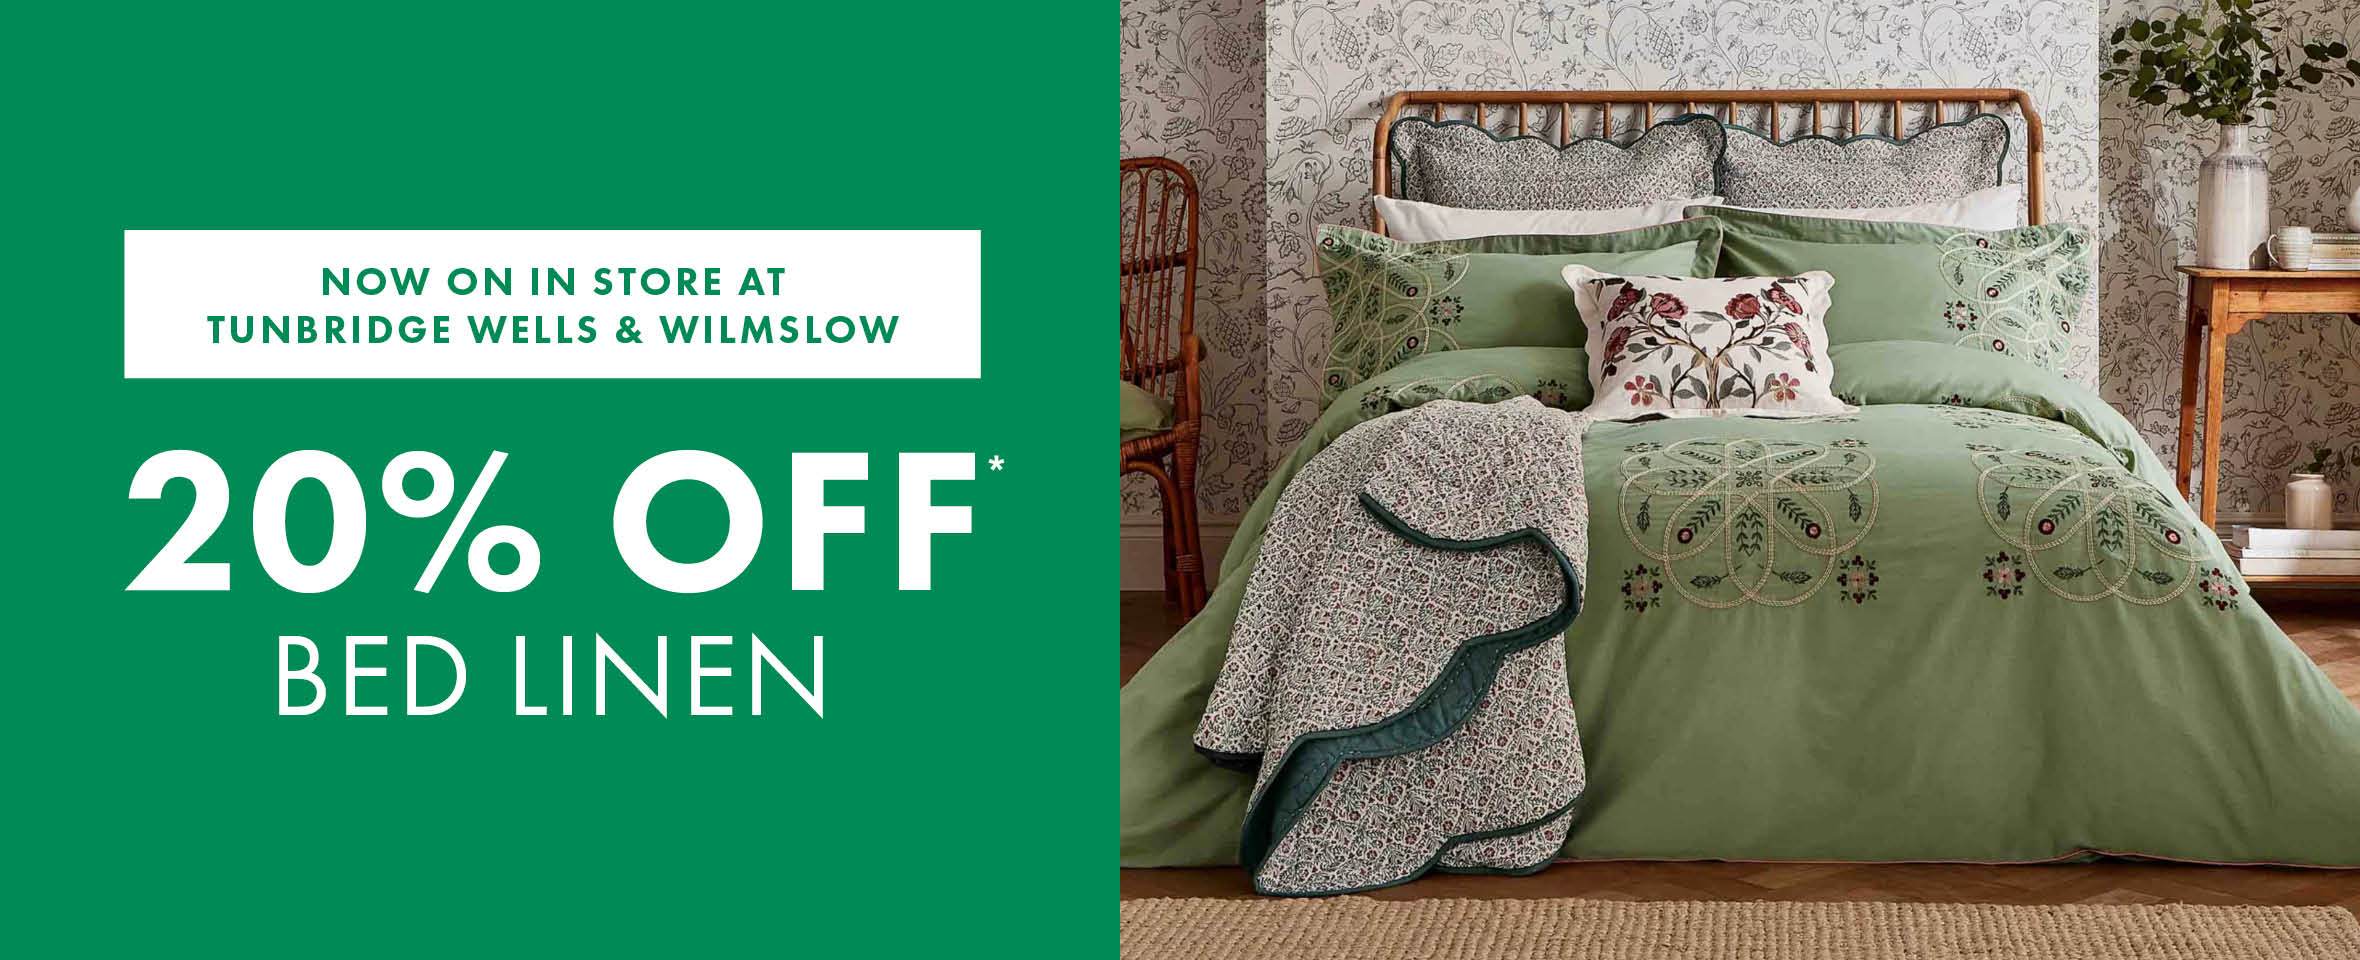 20% off bed linen in store at Tunbridge Wells and Wilmslow.